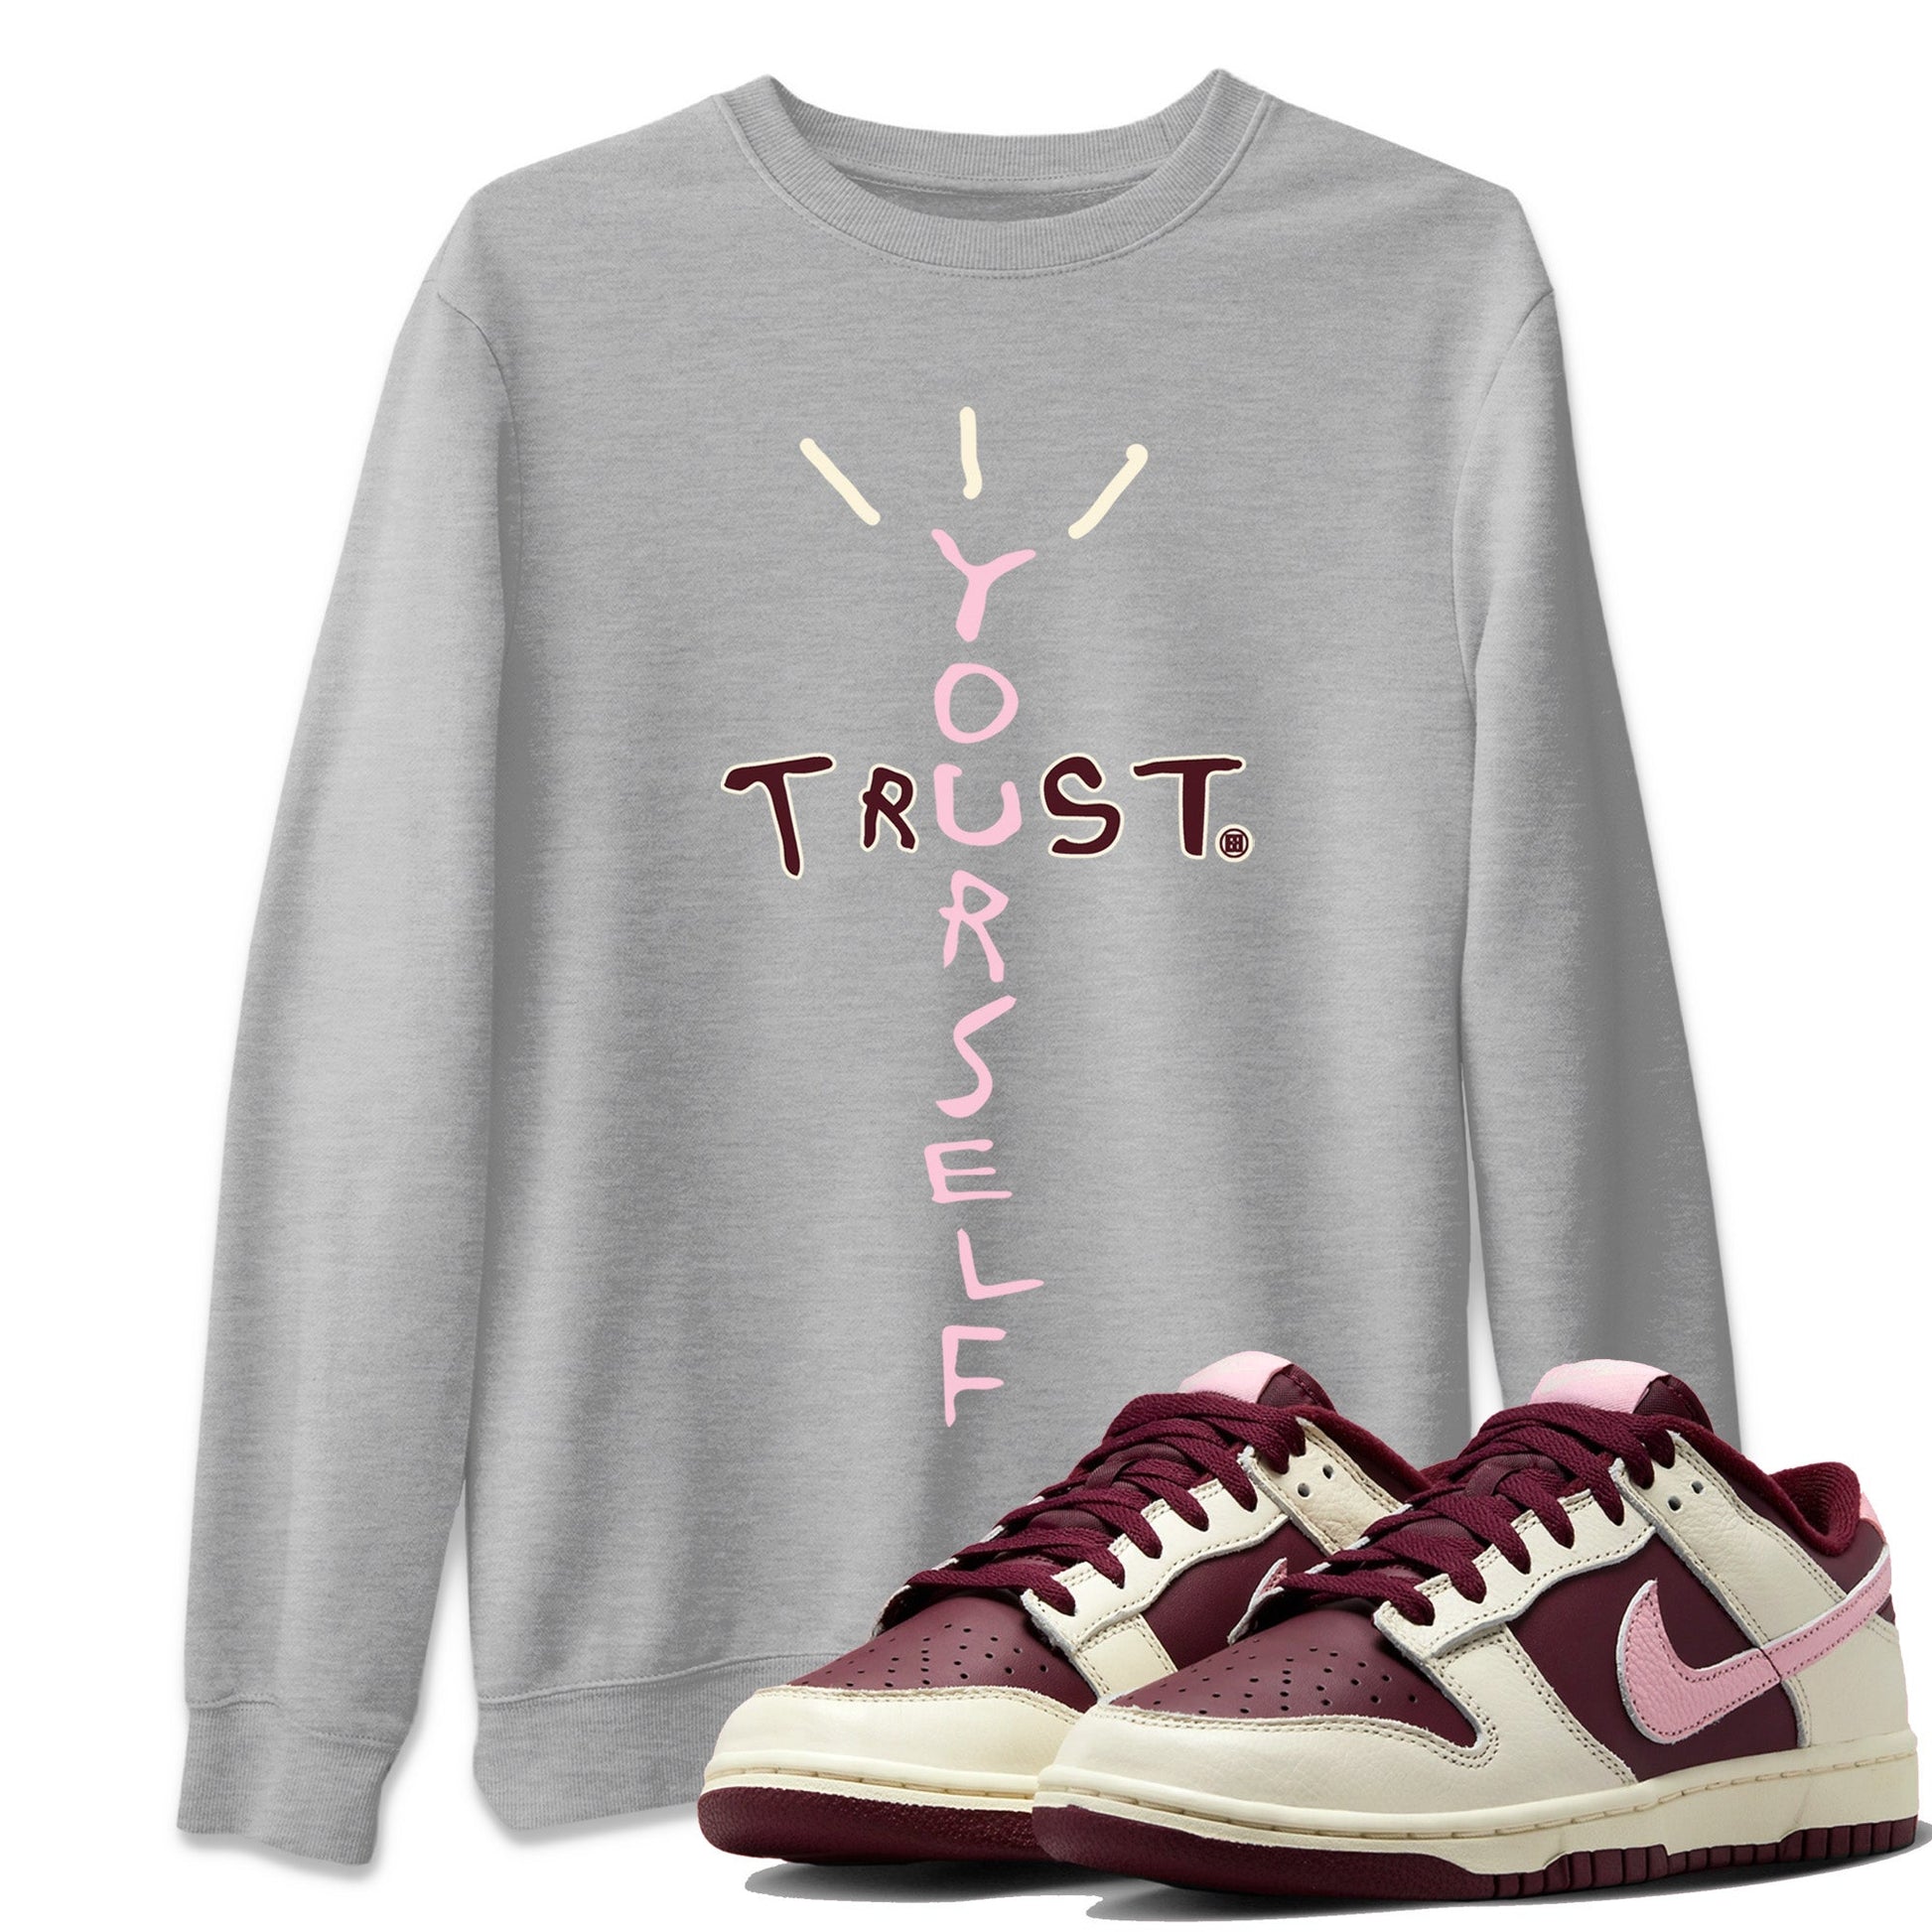 Dunk Valentines Day Sneaker Match Tees Trust Yourself Sneaker Tees Nike Dunk Valentine's Day Sneaker SNRT Sneaker Tees Unisex Shirts